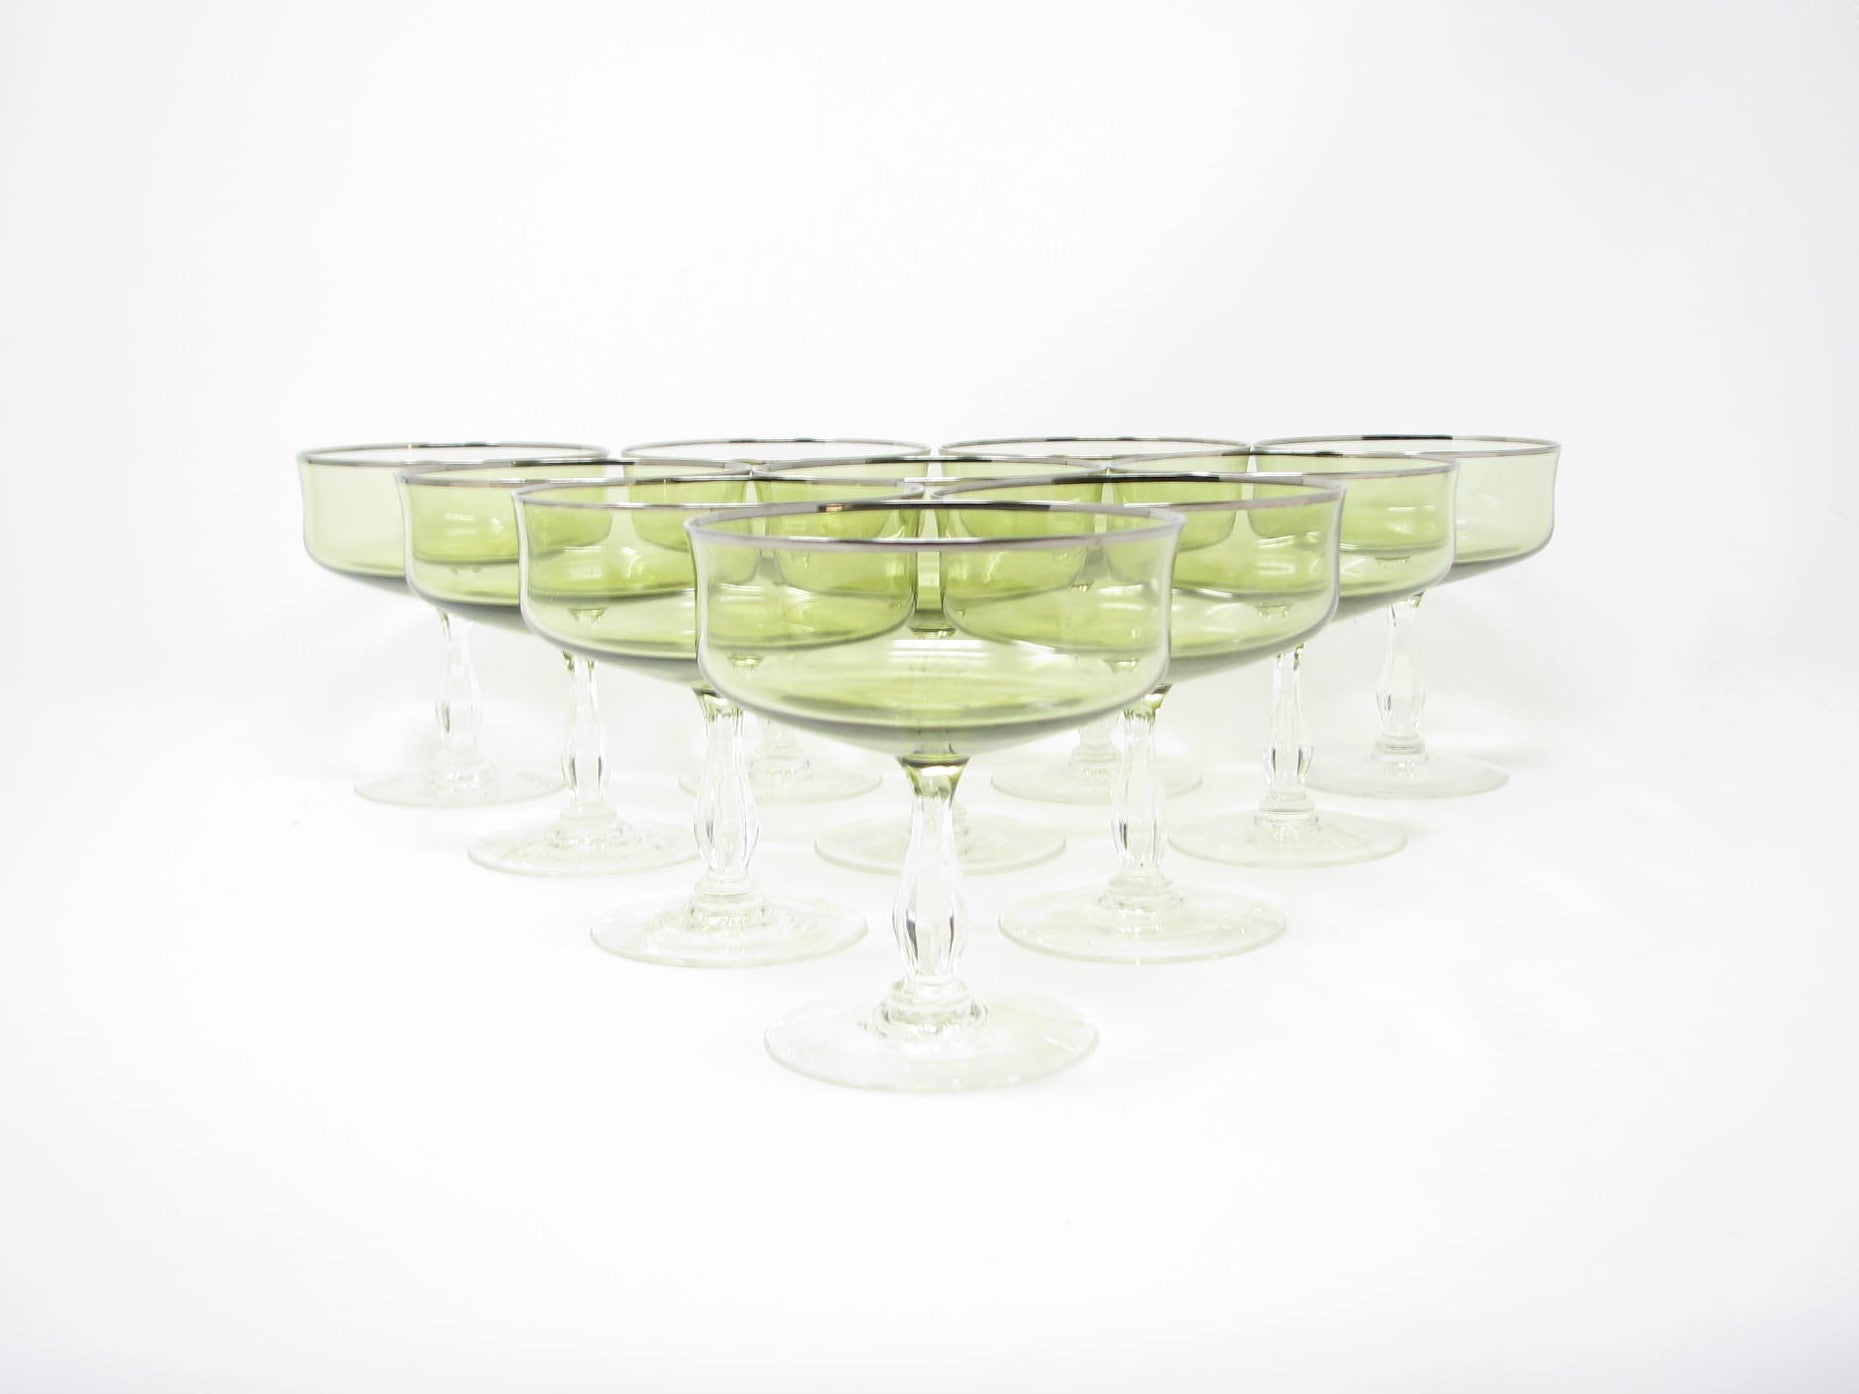 edgebrookhouse - Vintage Noritake Rainbow Green Coupe Champagne Coupe Glasses with Platinum Trim - 10 Pieces